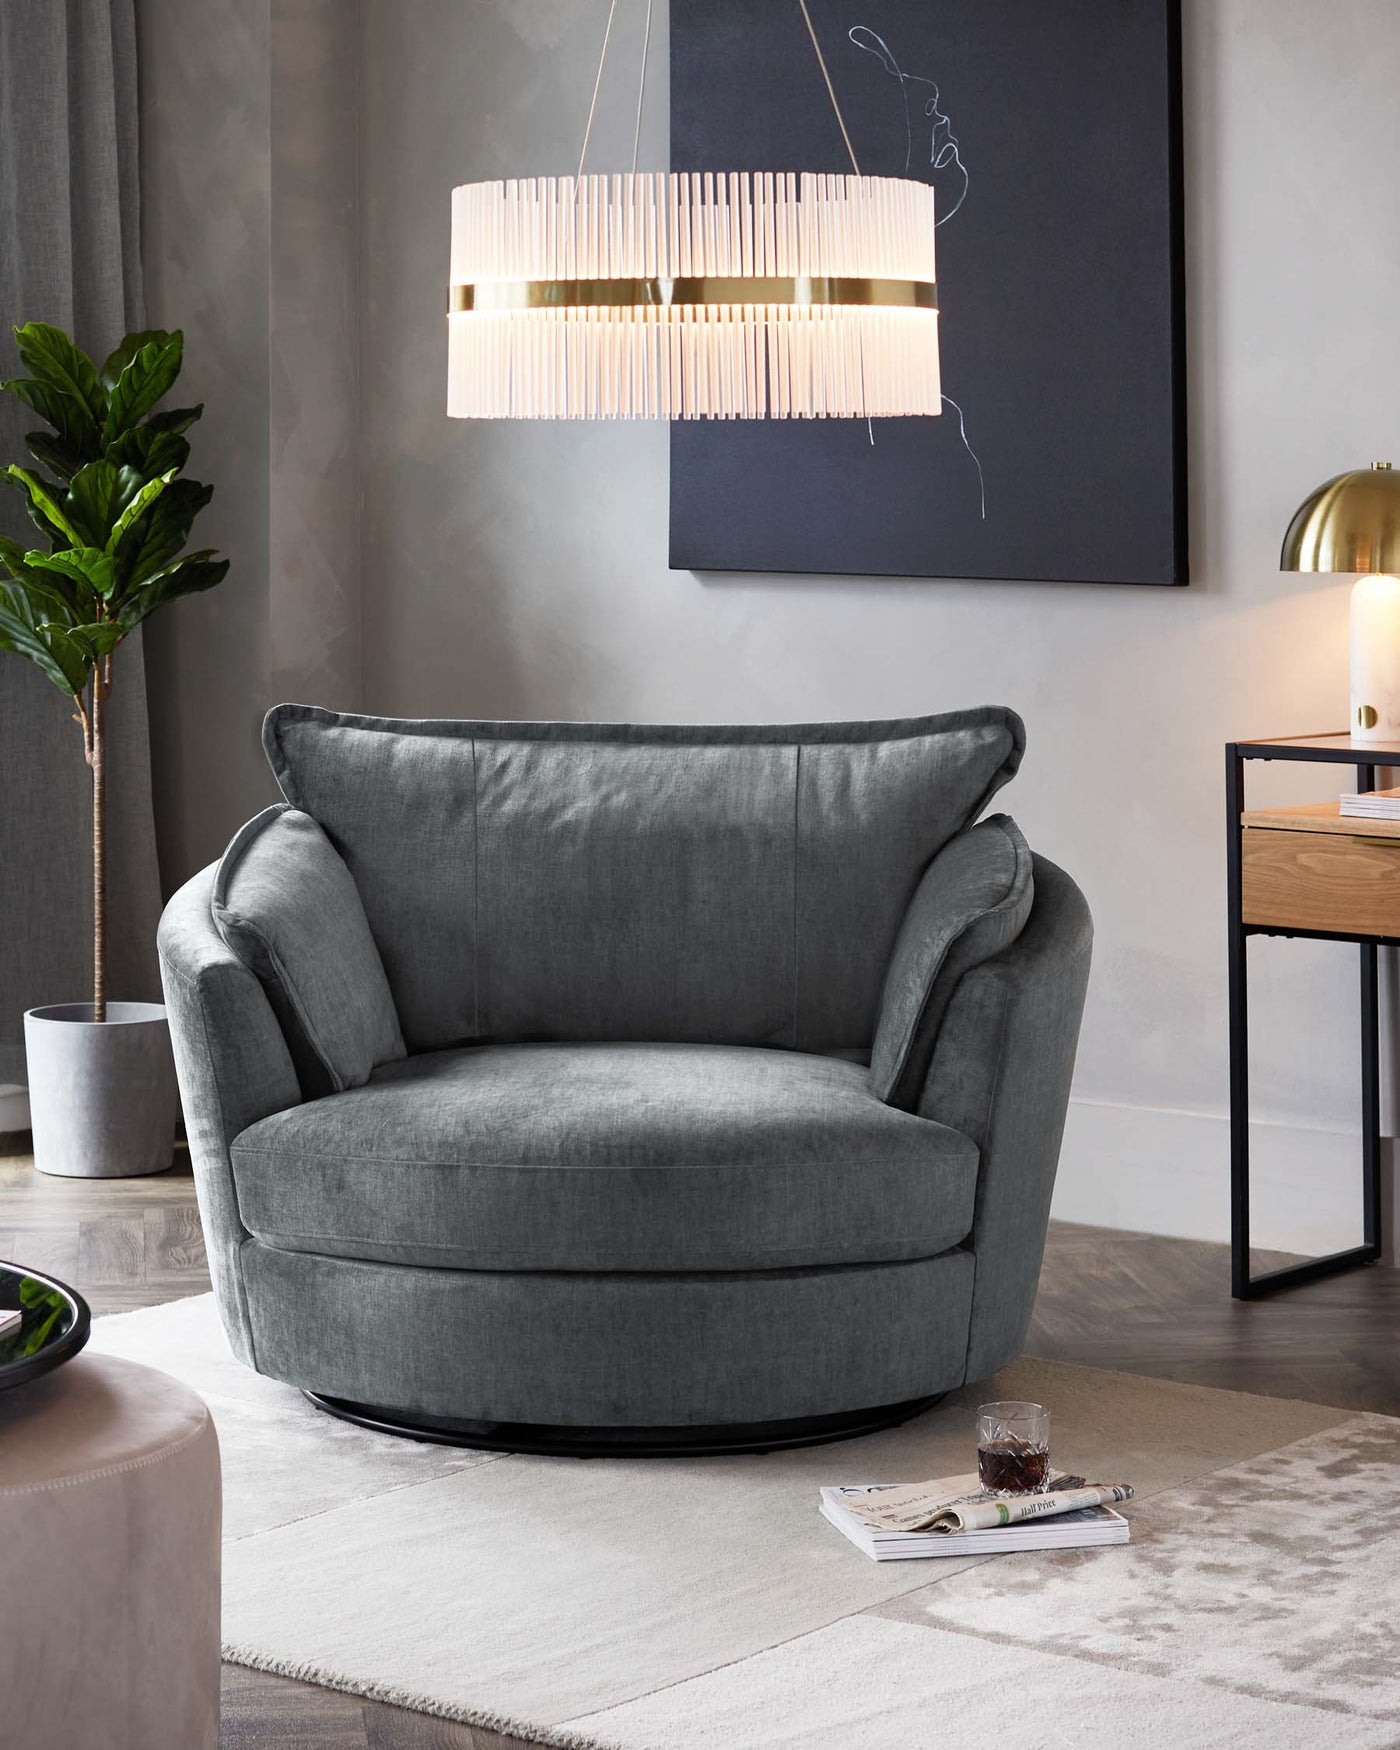 Plush, oversized round armchair in elegant grey fabric with a soft, deep seat and cushioned backrest, set on a low-profile black circular base. The chair is complemented by a textured off-white area rug beneath it and a sleek side table that partially visible to the right, displaying modern decor.